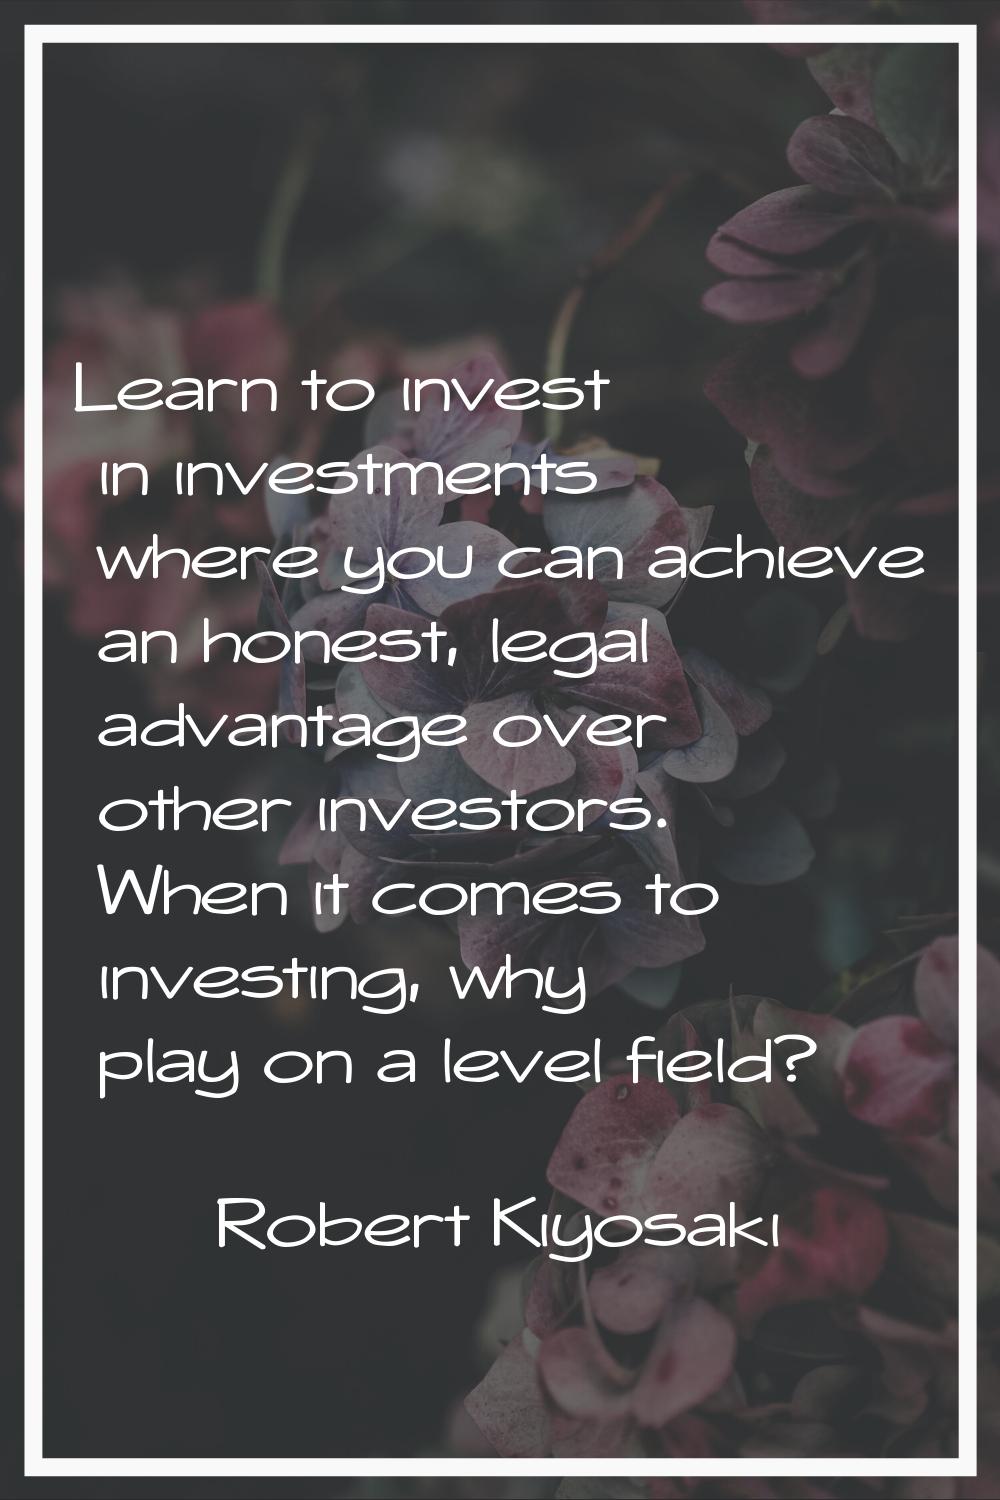 Learn to invest in investments where you can achieve an honest, legal advantage over other investor